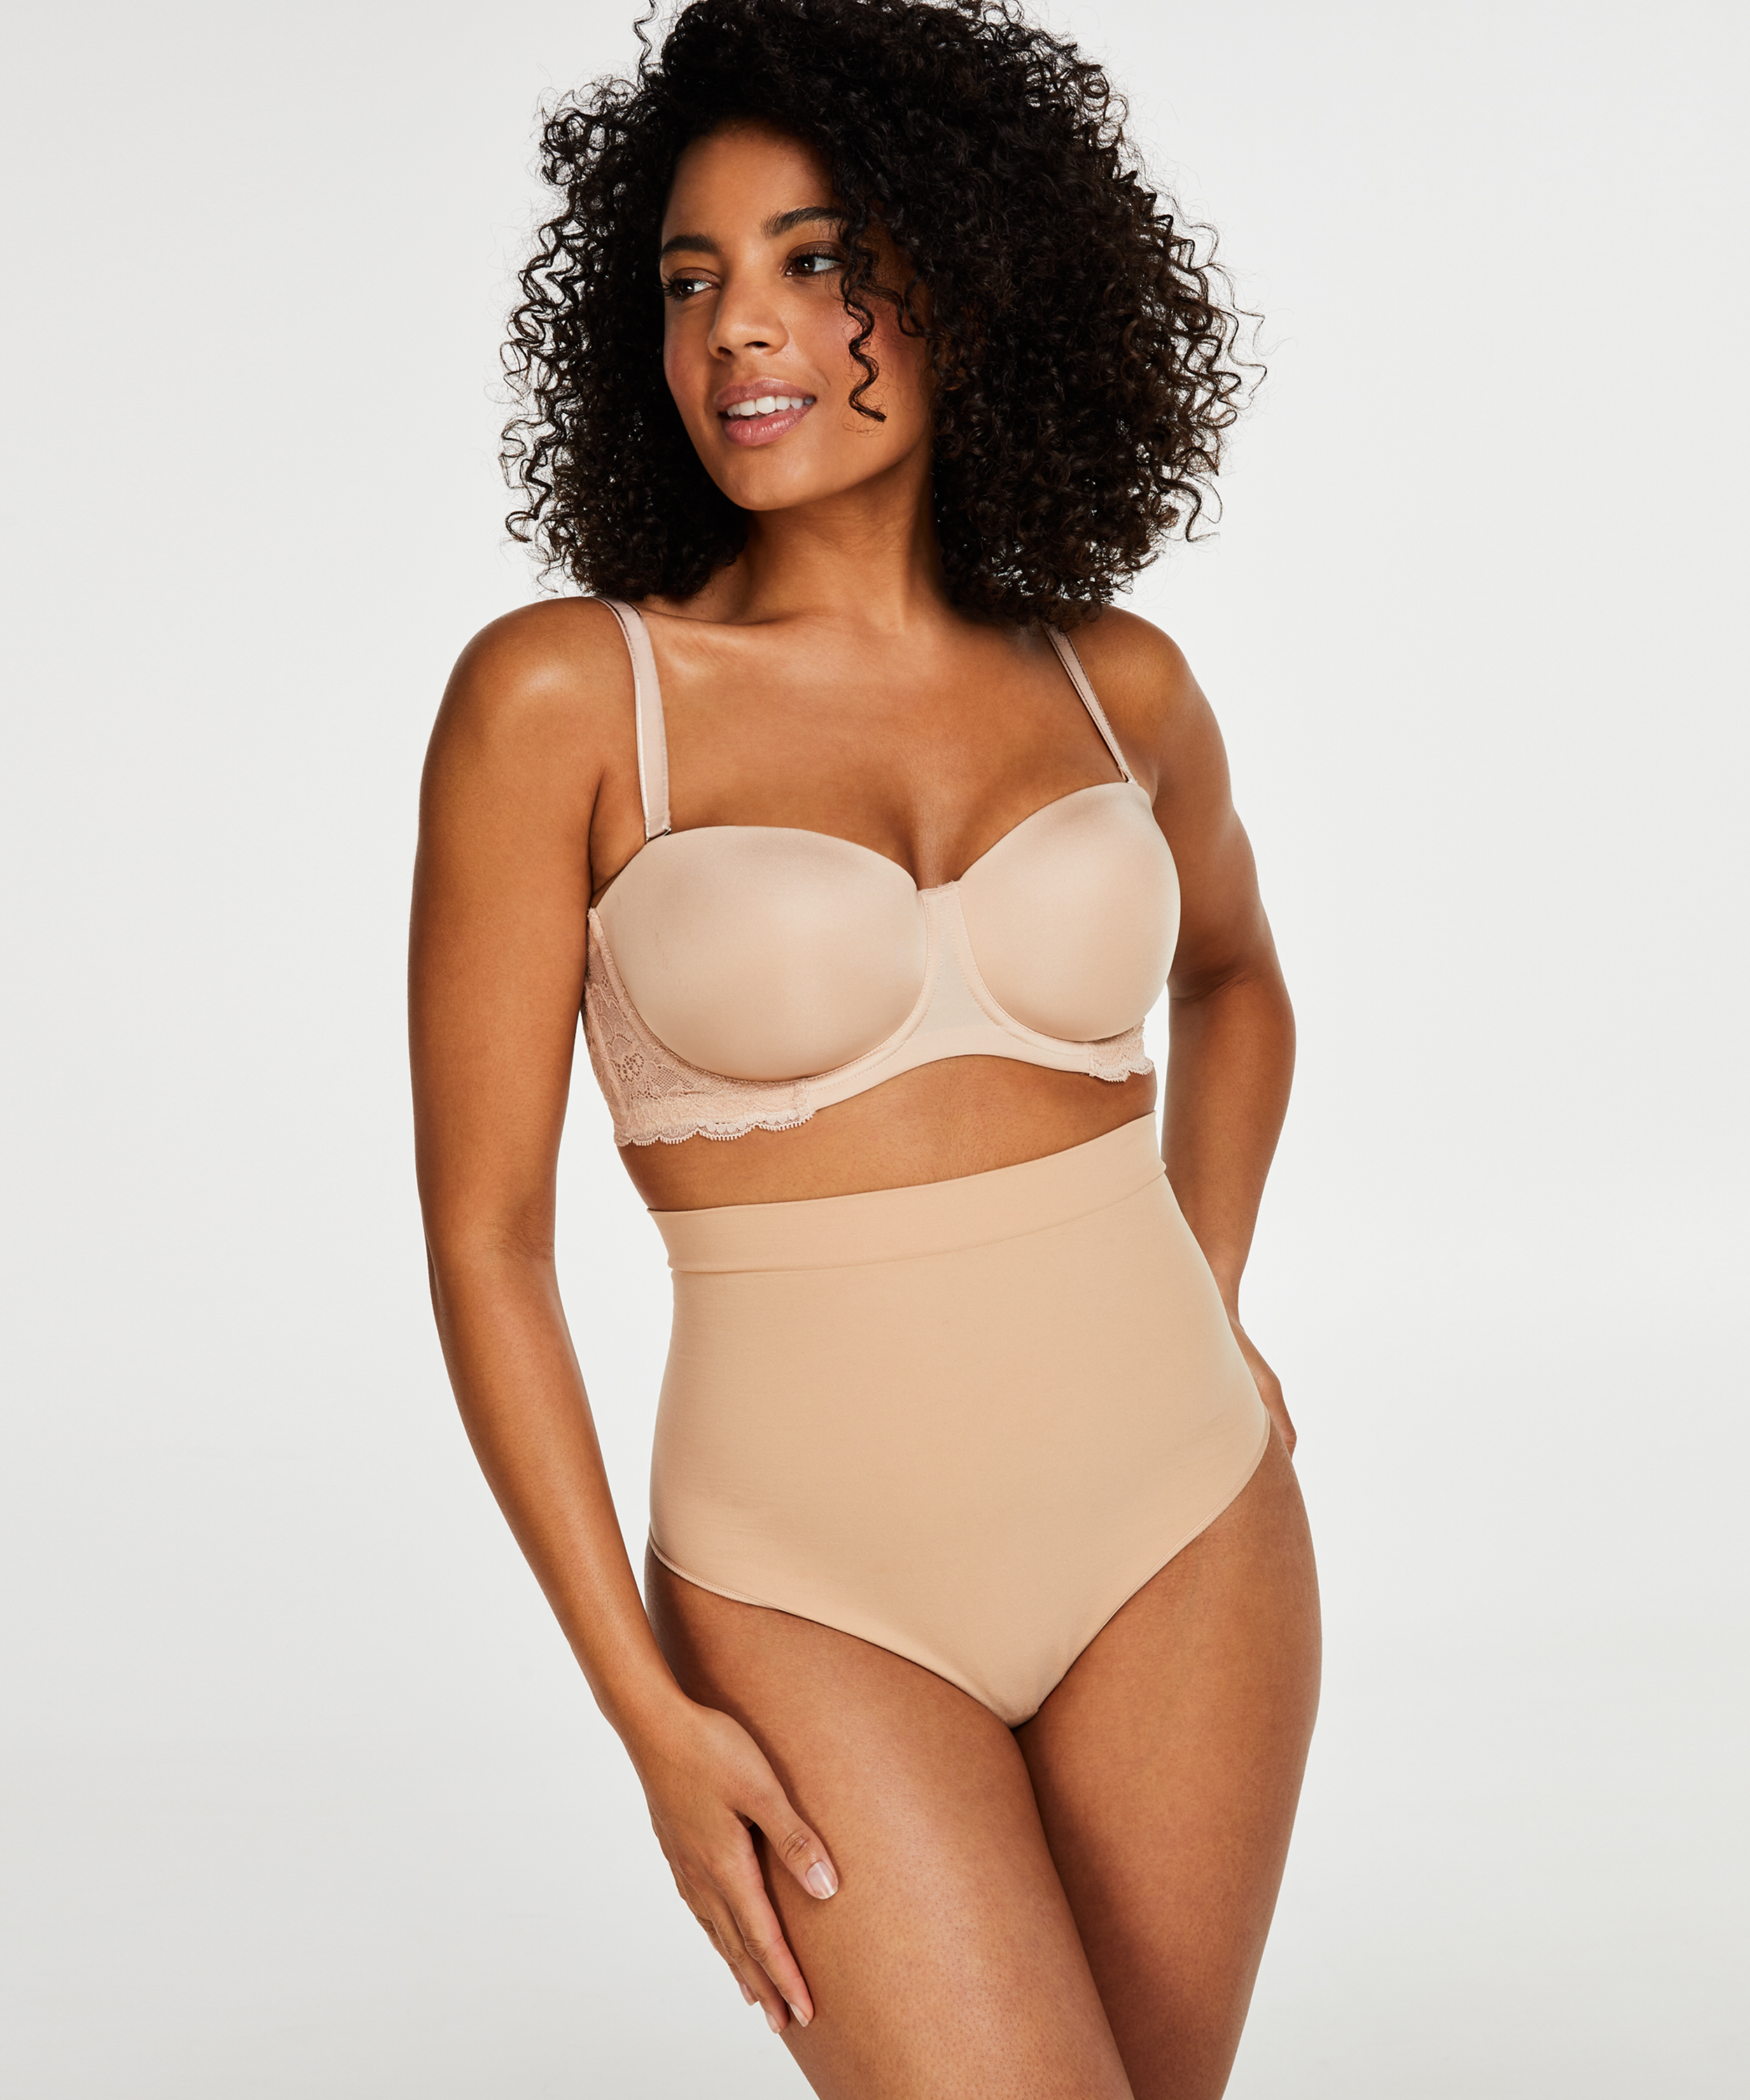 Firming high waisted thong - Level 2, Beżowy, main